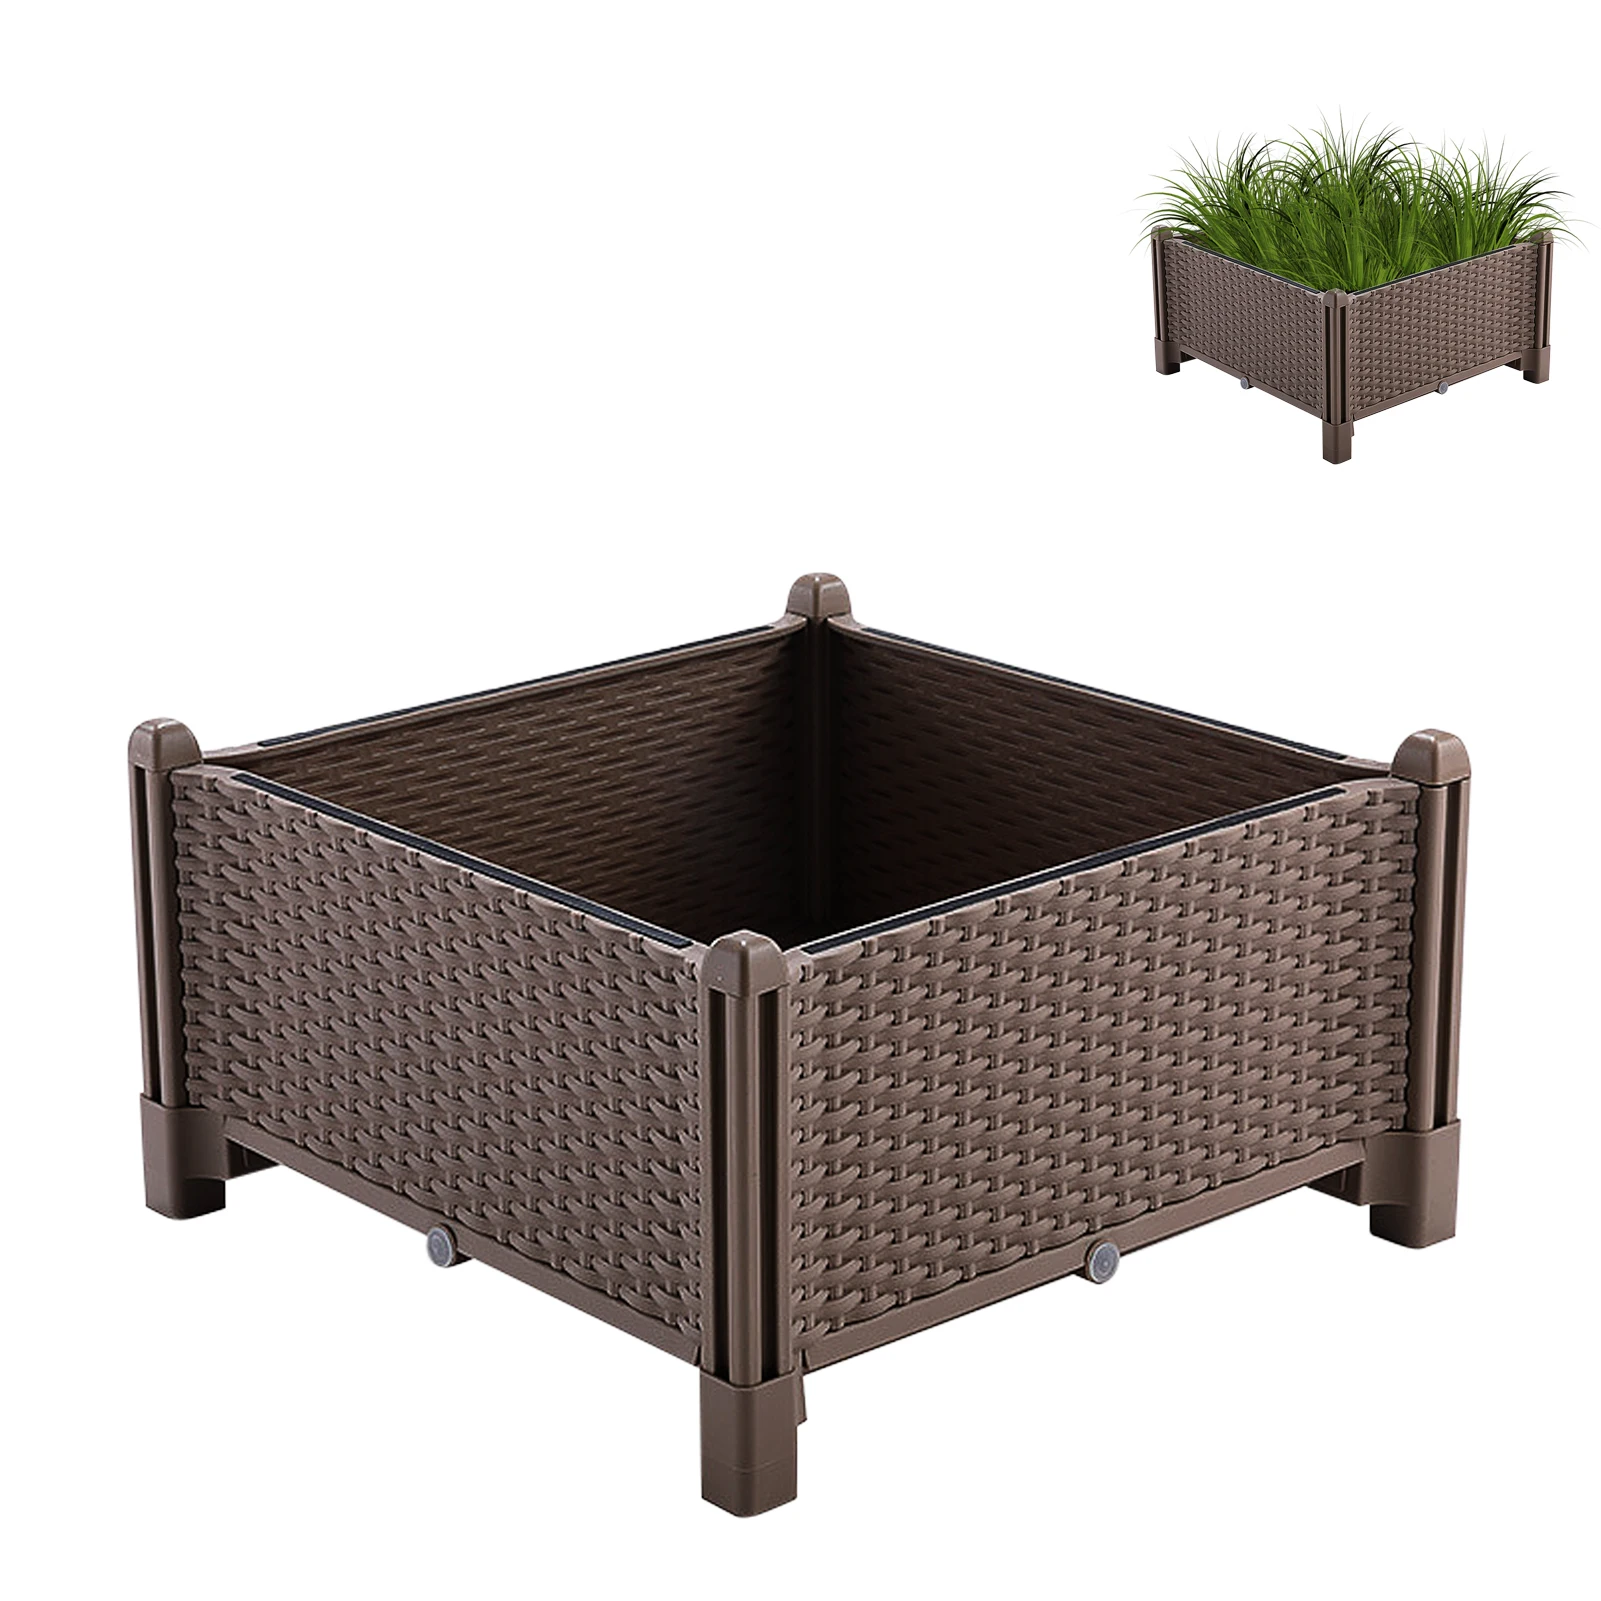 

Raised Garden Bed Raised Garden Beds With Self-Watering & Drainage Hole Design Perfect For Garden Patio Balcony Yard Cafe